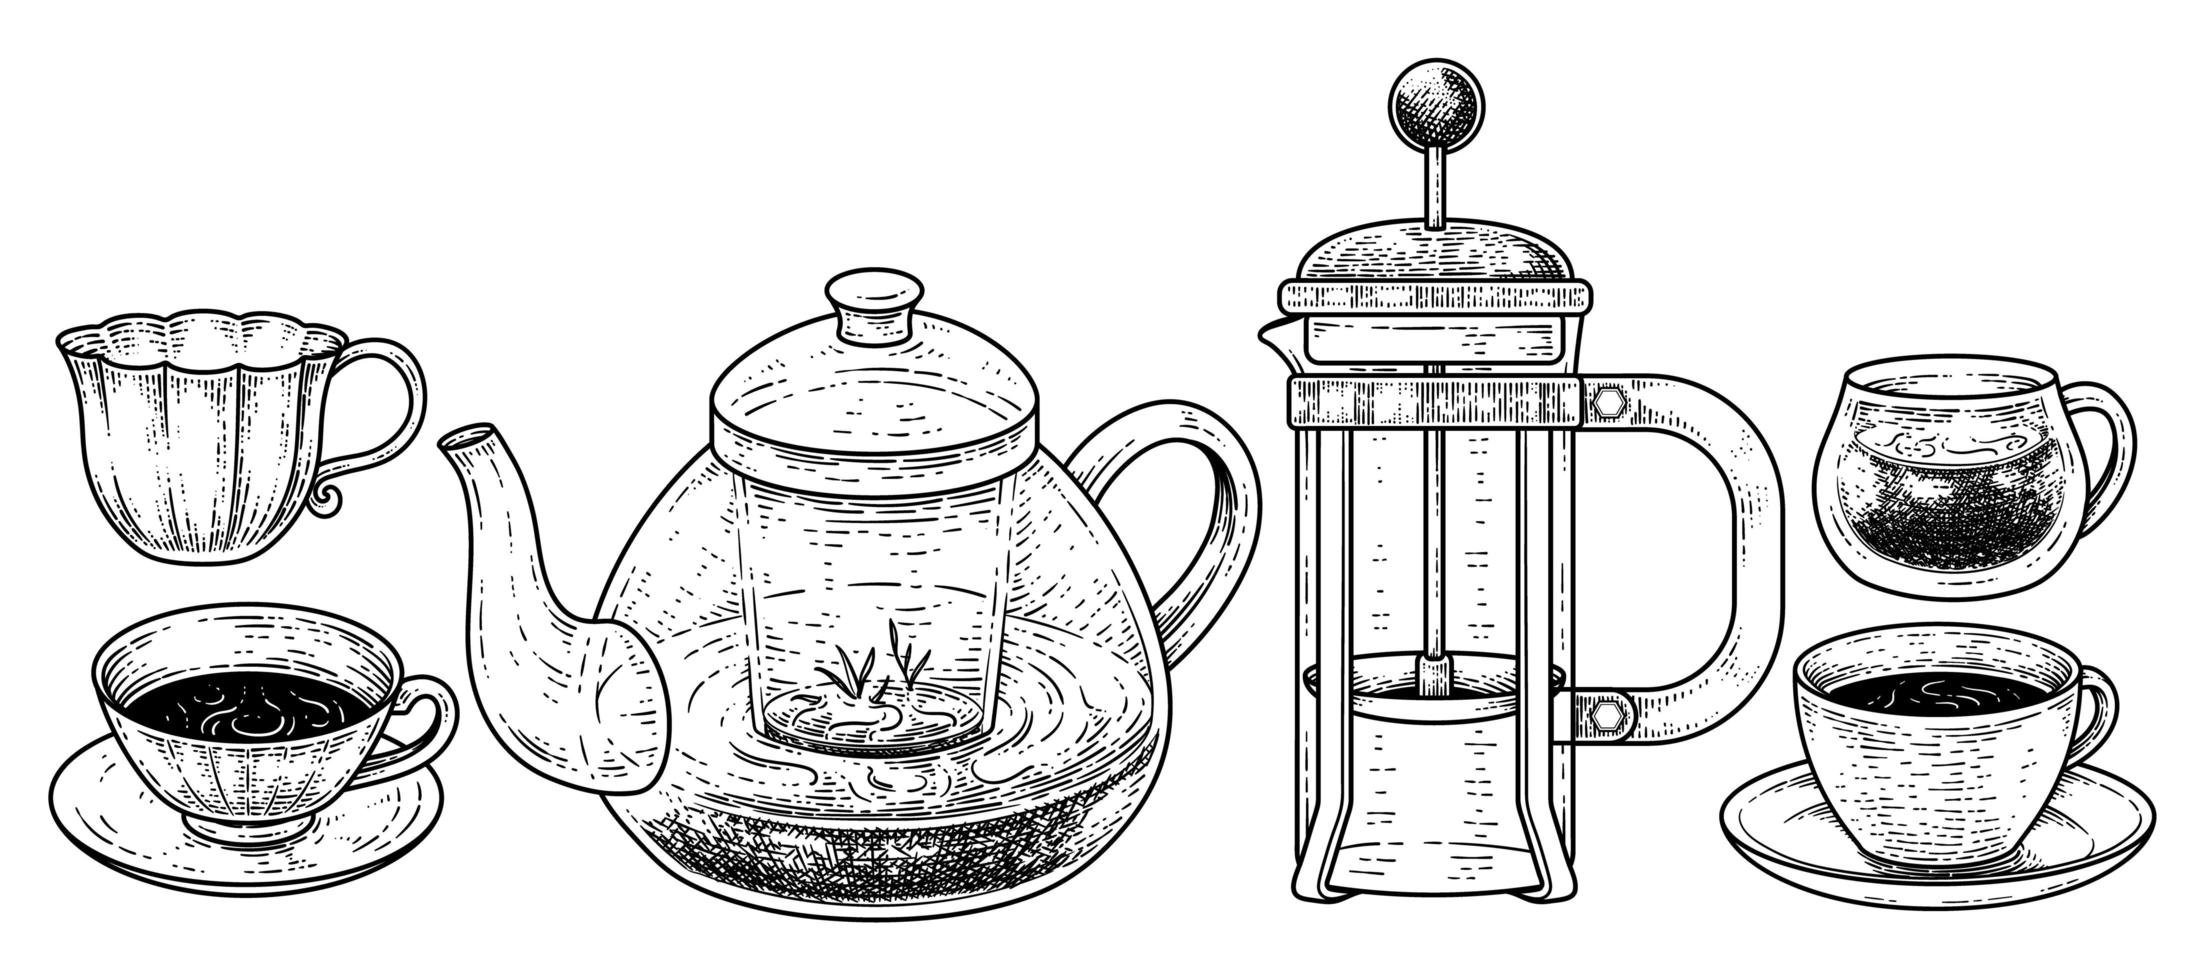 Vintage Drinks and Beverages Collection Hand drawn Sketch Elements. Teapot,Cup, Glass, Mug and french press vector Illustration